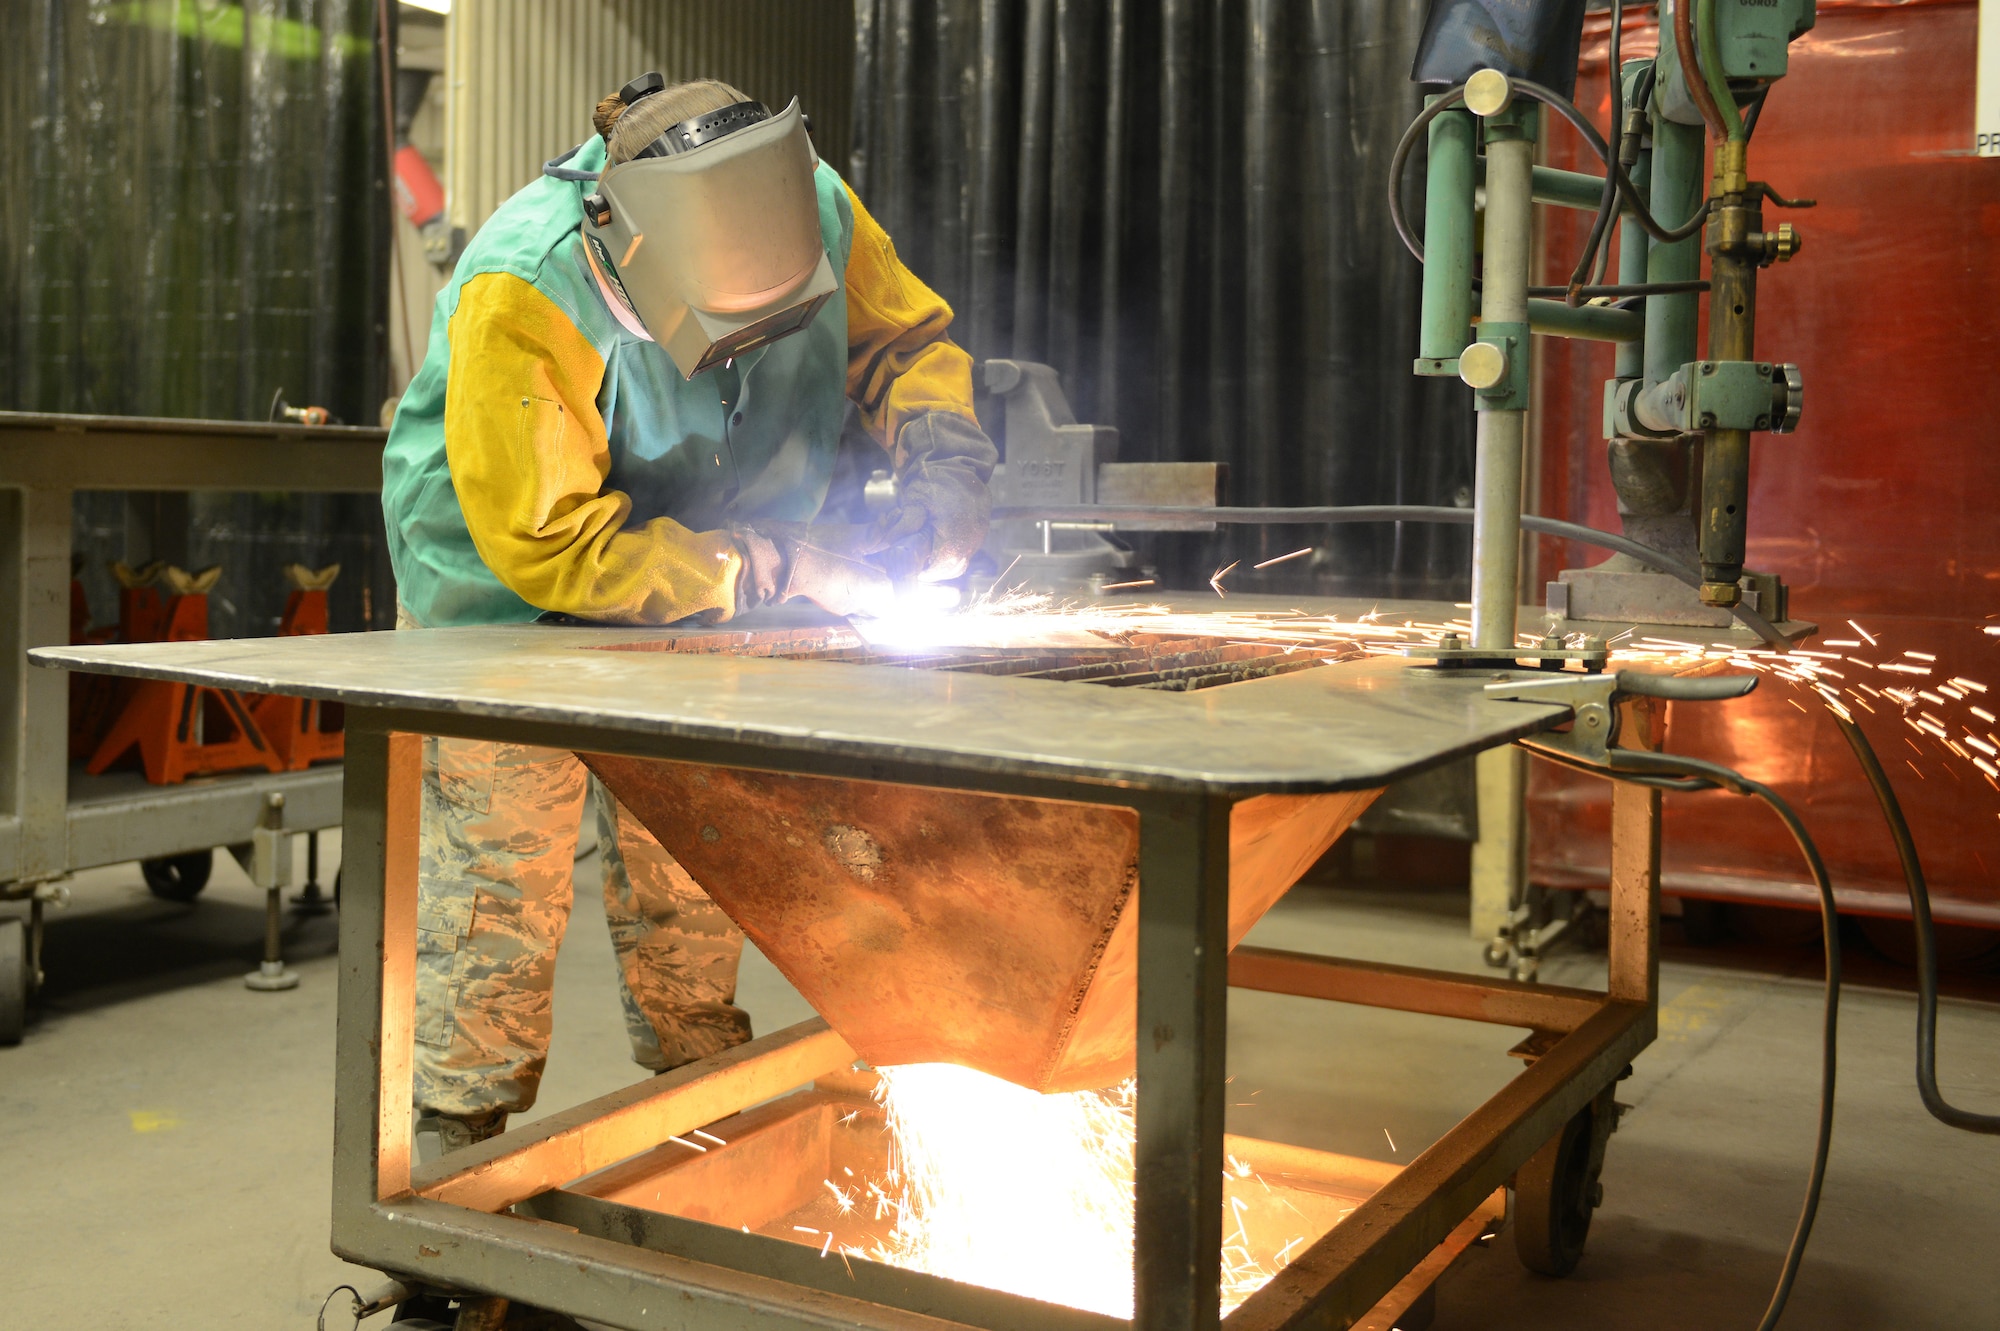 Senior Airman Rachel White, 56th Equipment Maintenance Squadron metals technology journeyman, uses a plasma cutter on a piece of scrap metal at Luke Air Force Base, Arizona, Oct. 30, 2015. Metals technology technicians work mostly on aerospace ground equipment and case by case equipment. (U.S. Air Force photo by Senior Airman James Hensley)